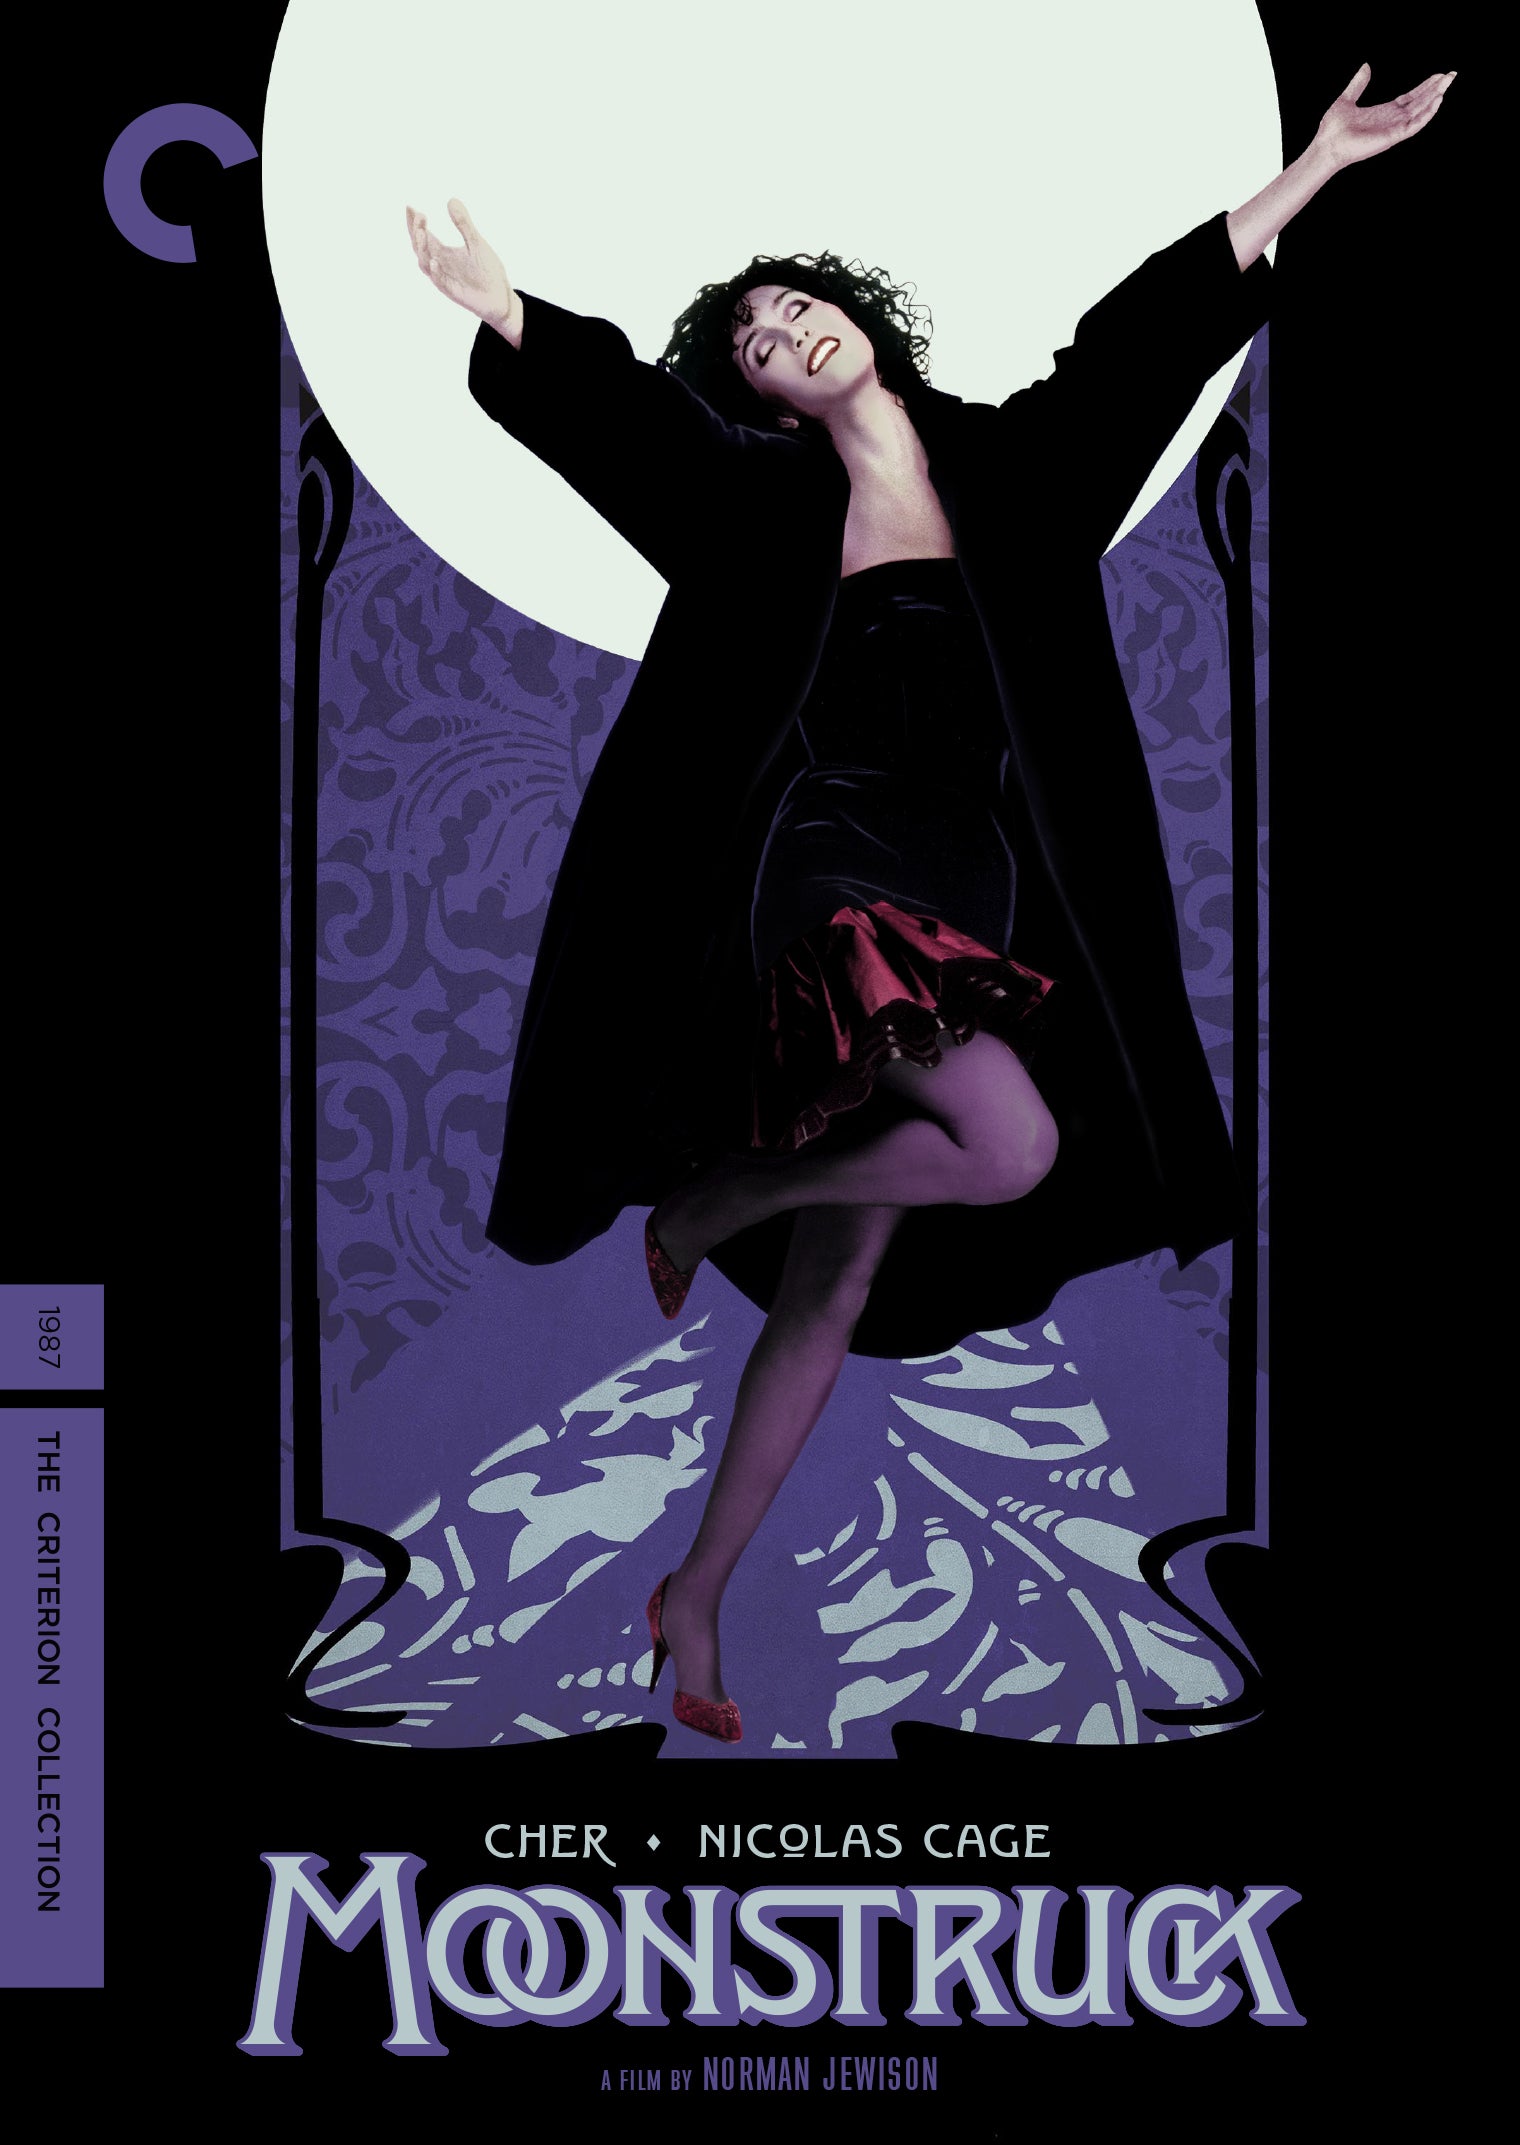 Moonstruck [Criterion Collection] [2 Discs] cover art